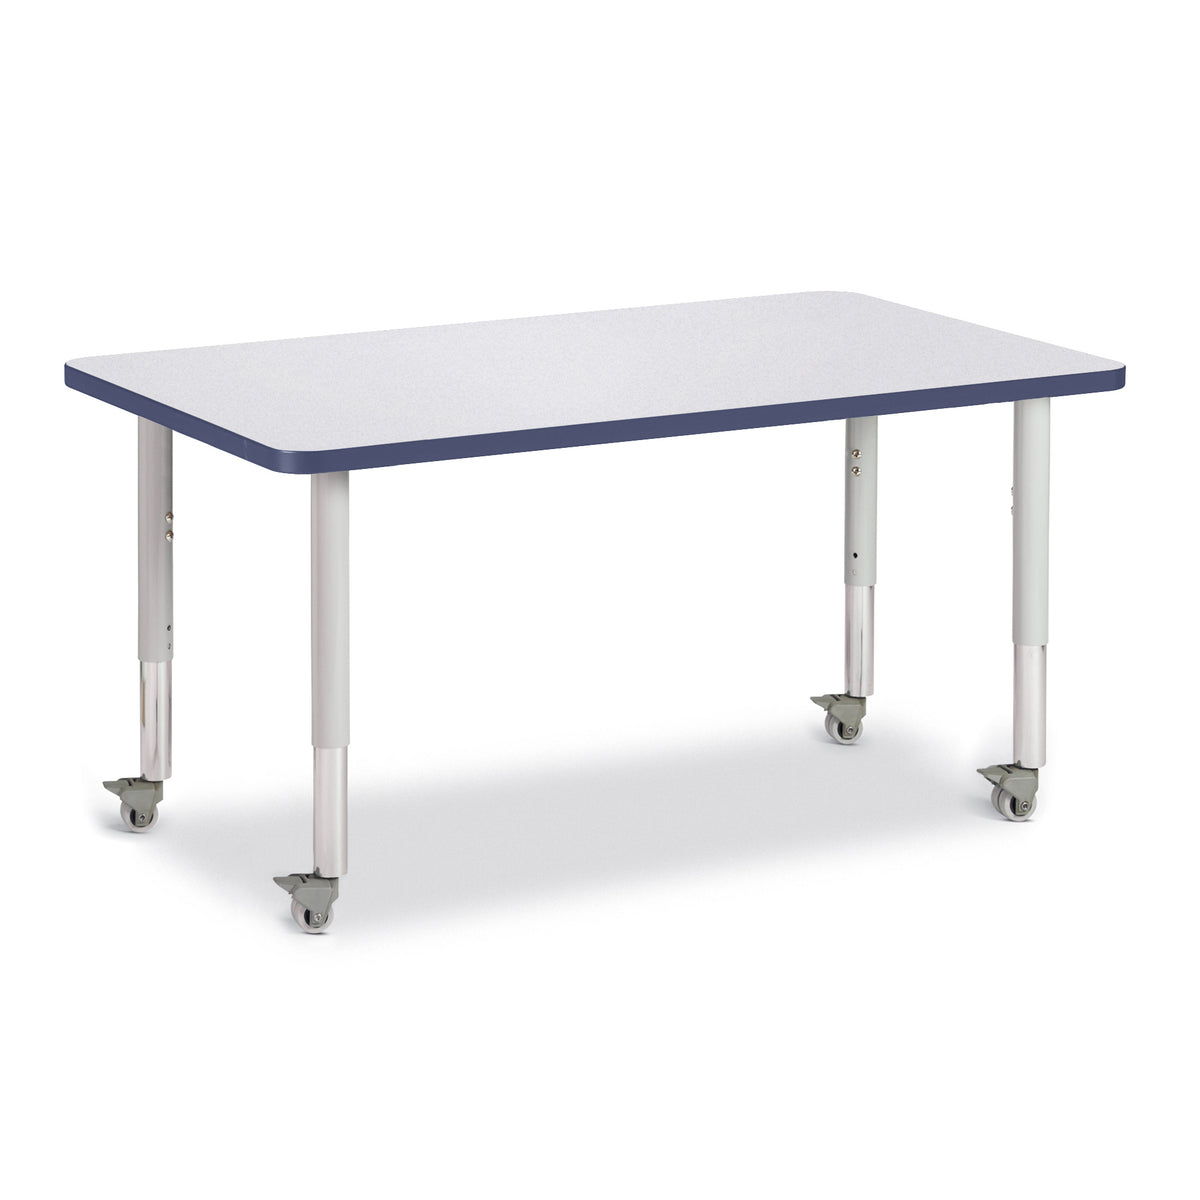 6473JCM112, Berries Rectangle Activity Table - 30" X 48", Mobile - Freckled Gray/Navy/Gray